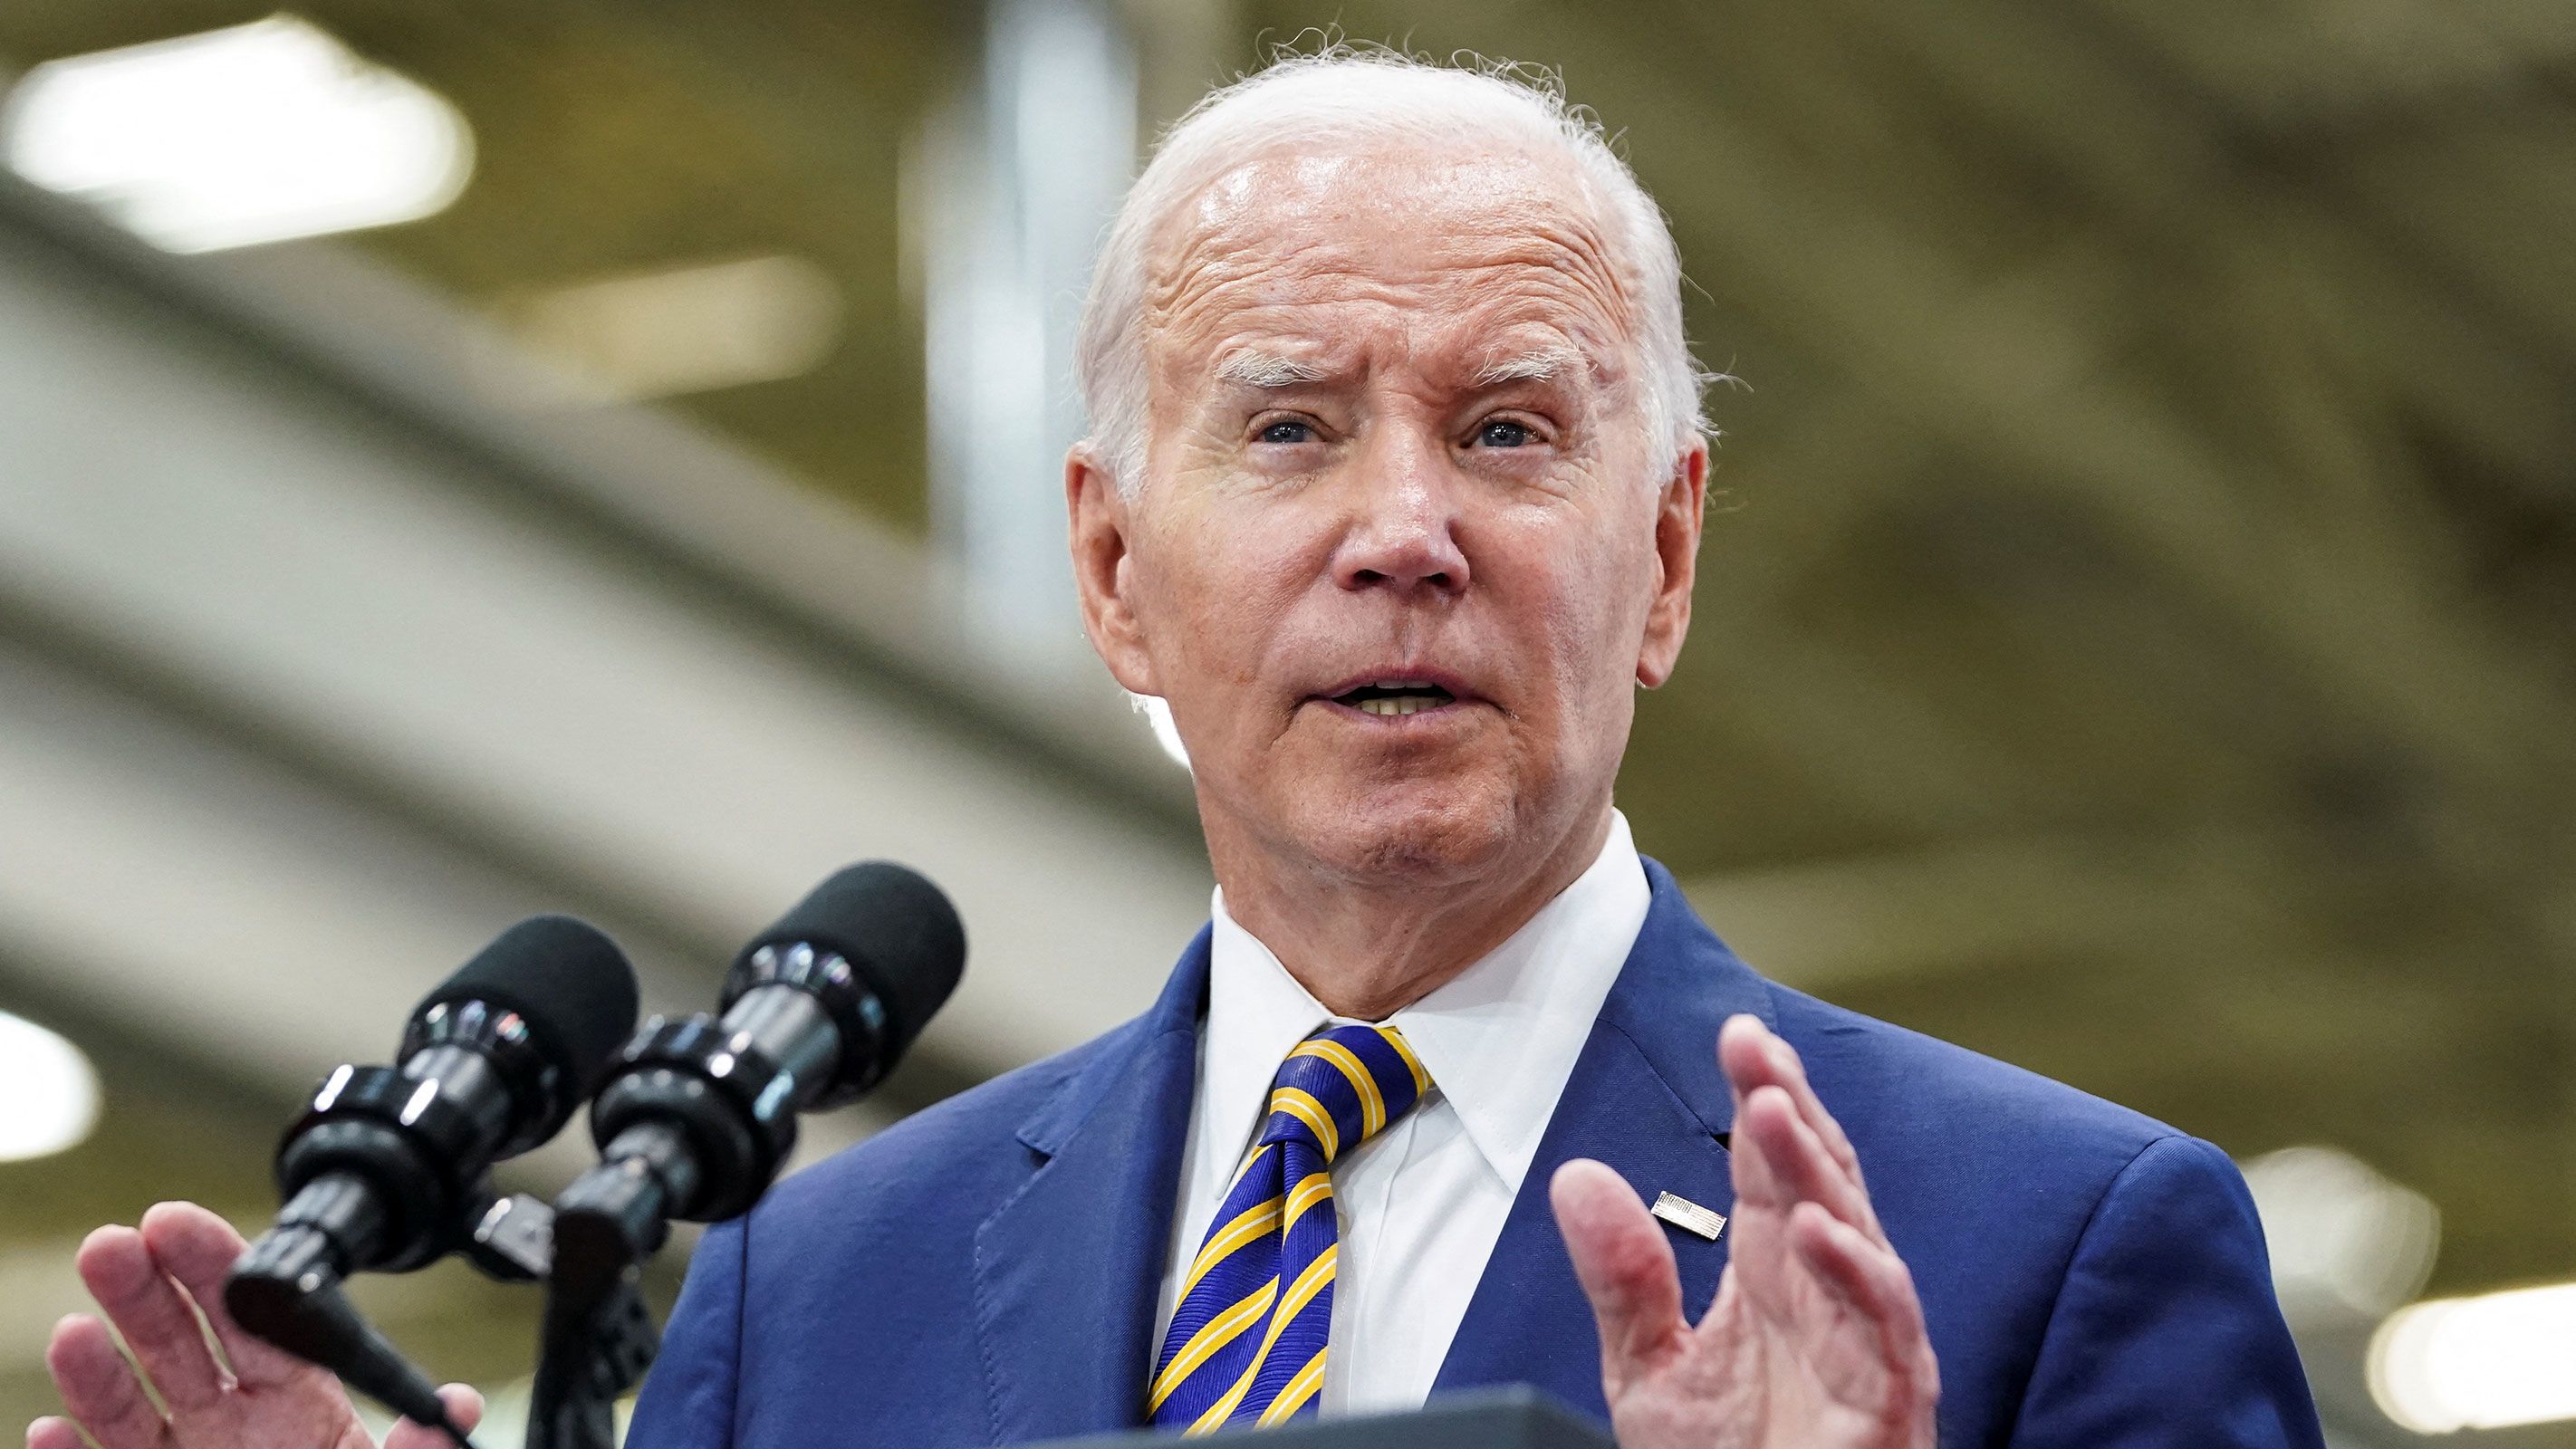 Critics charge political concerns have led Biden administration to